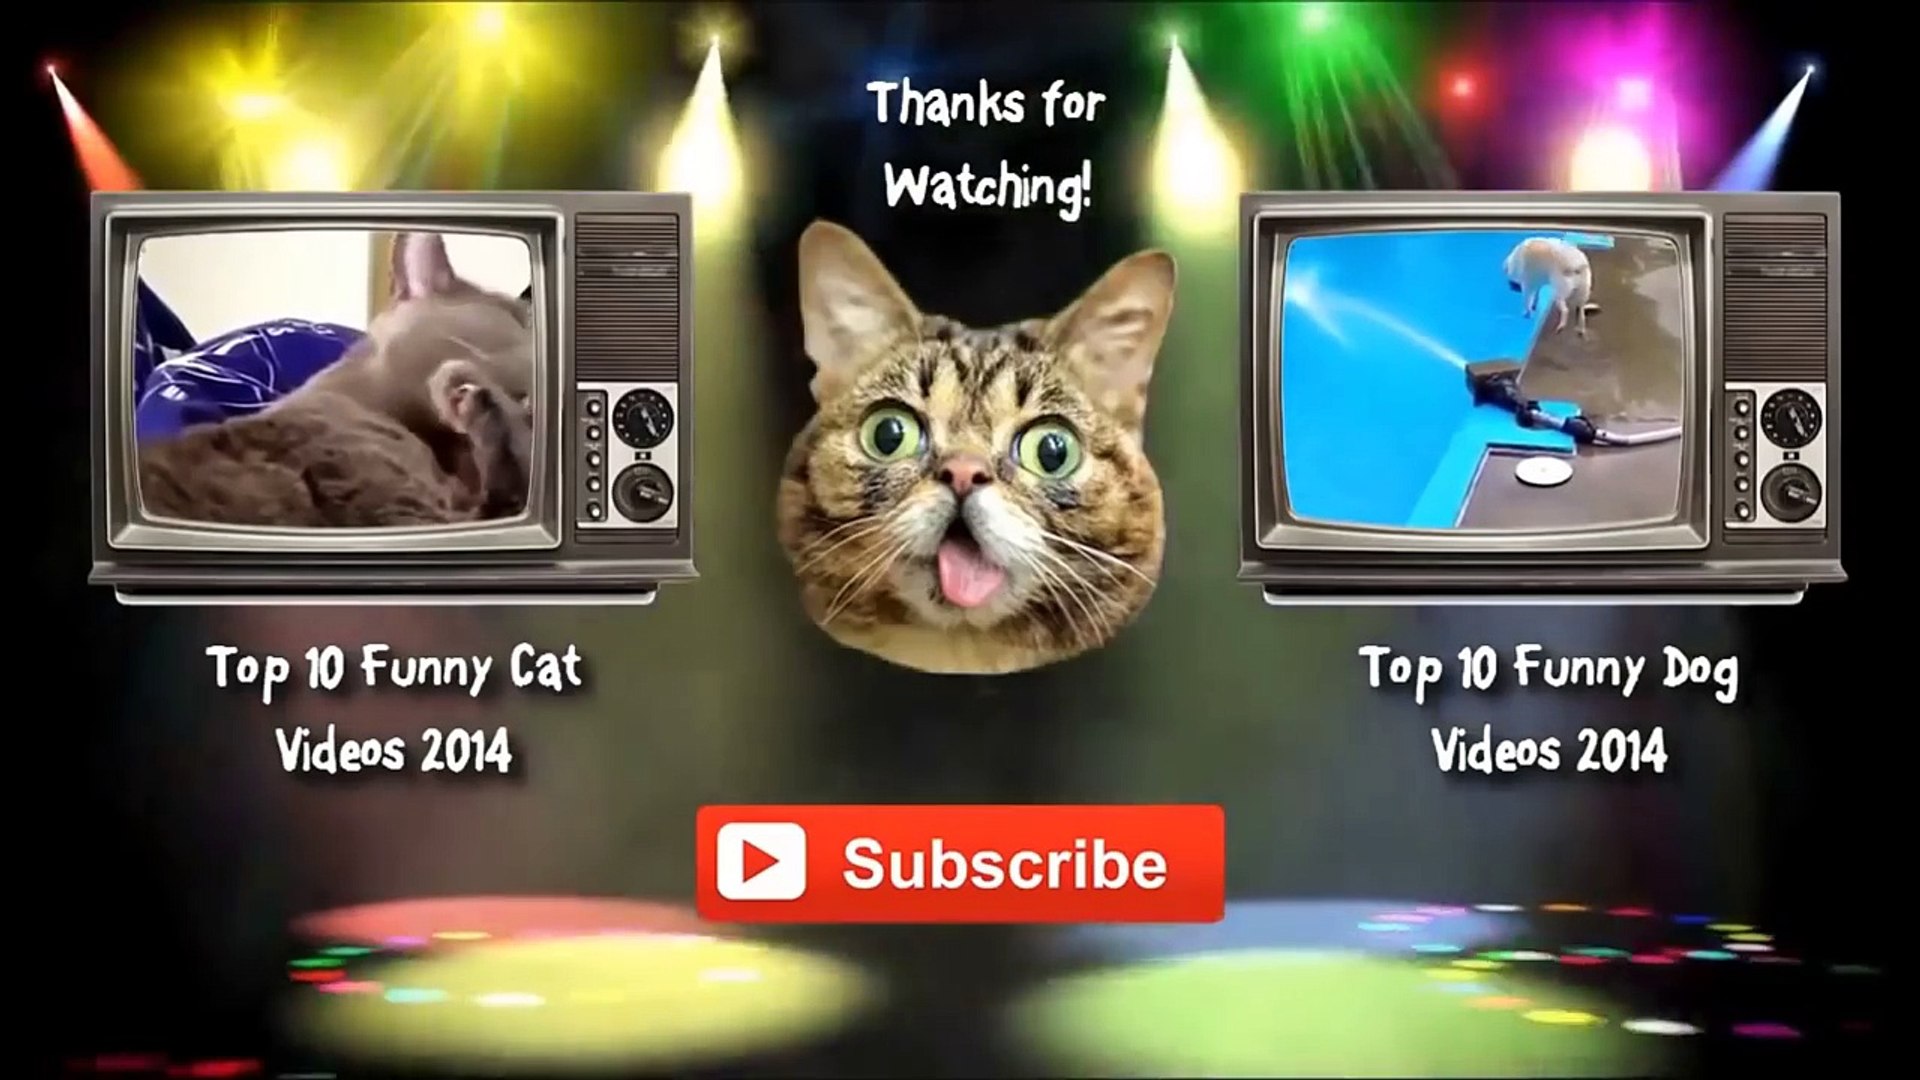 silly cat videos - cat videos funny - funny cat photos - Funny cat compilation